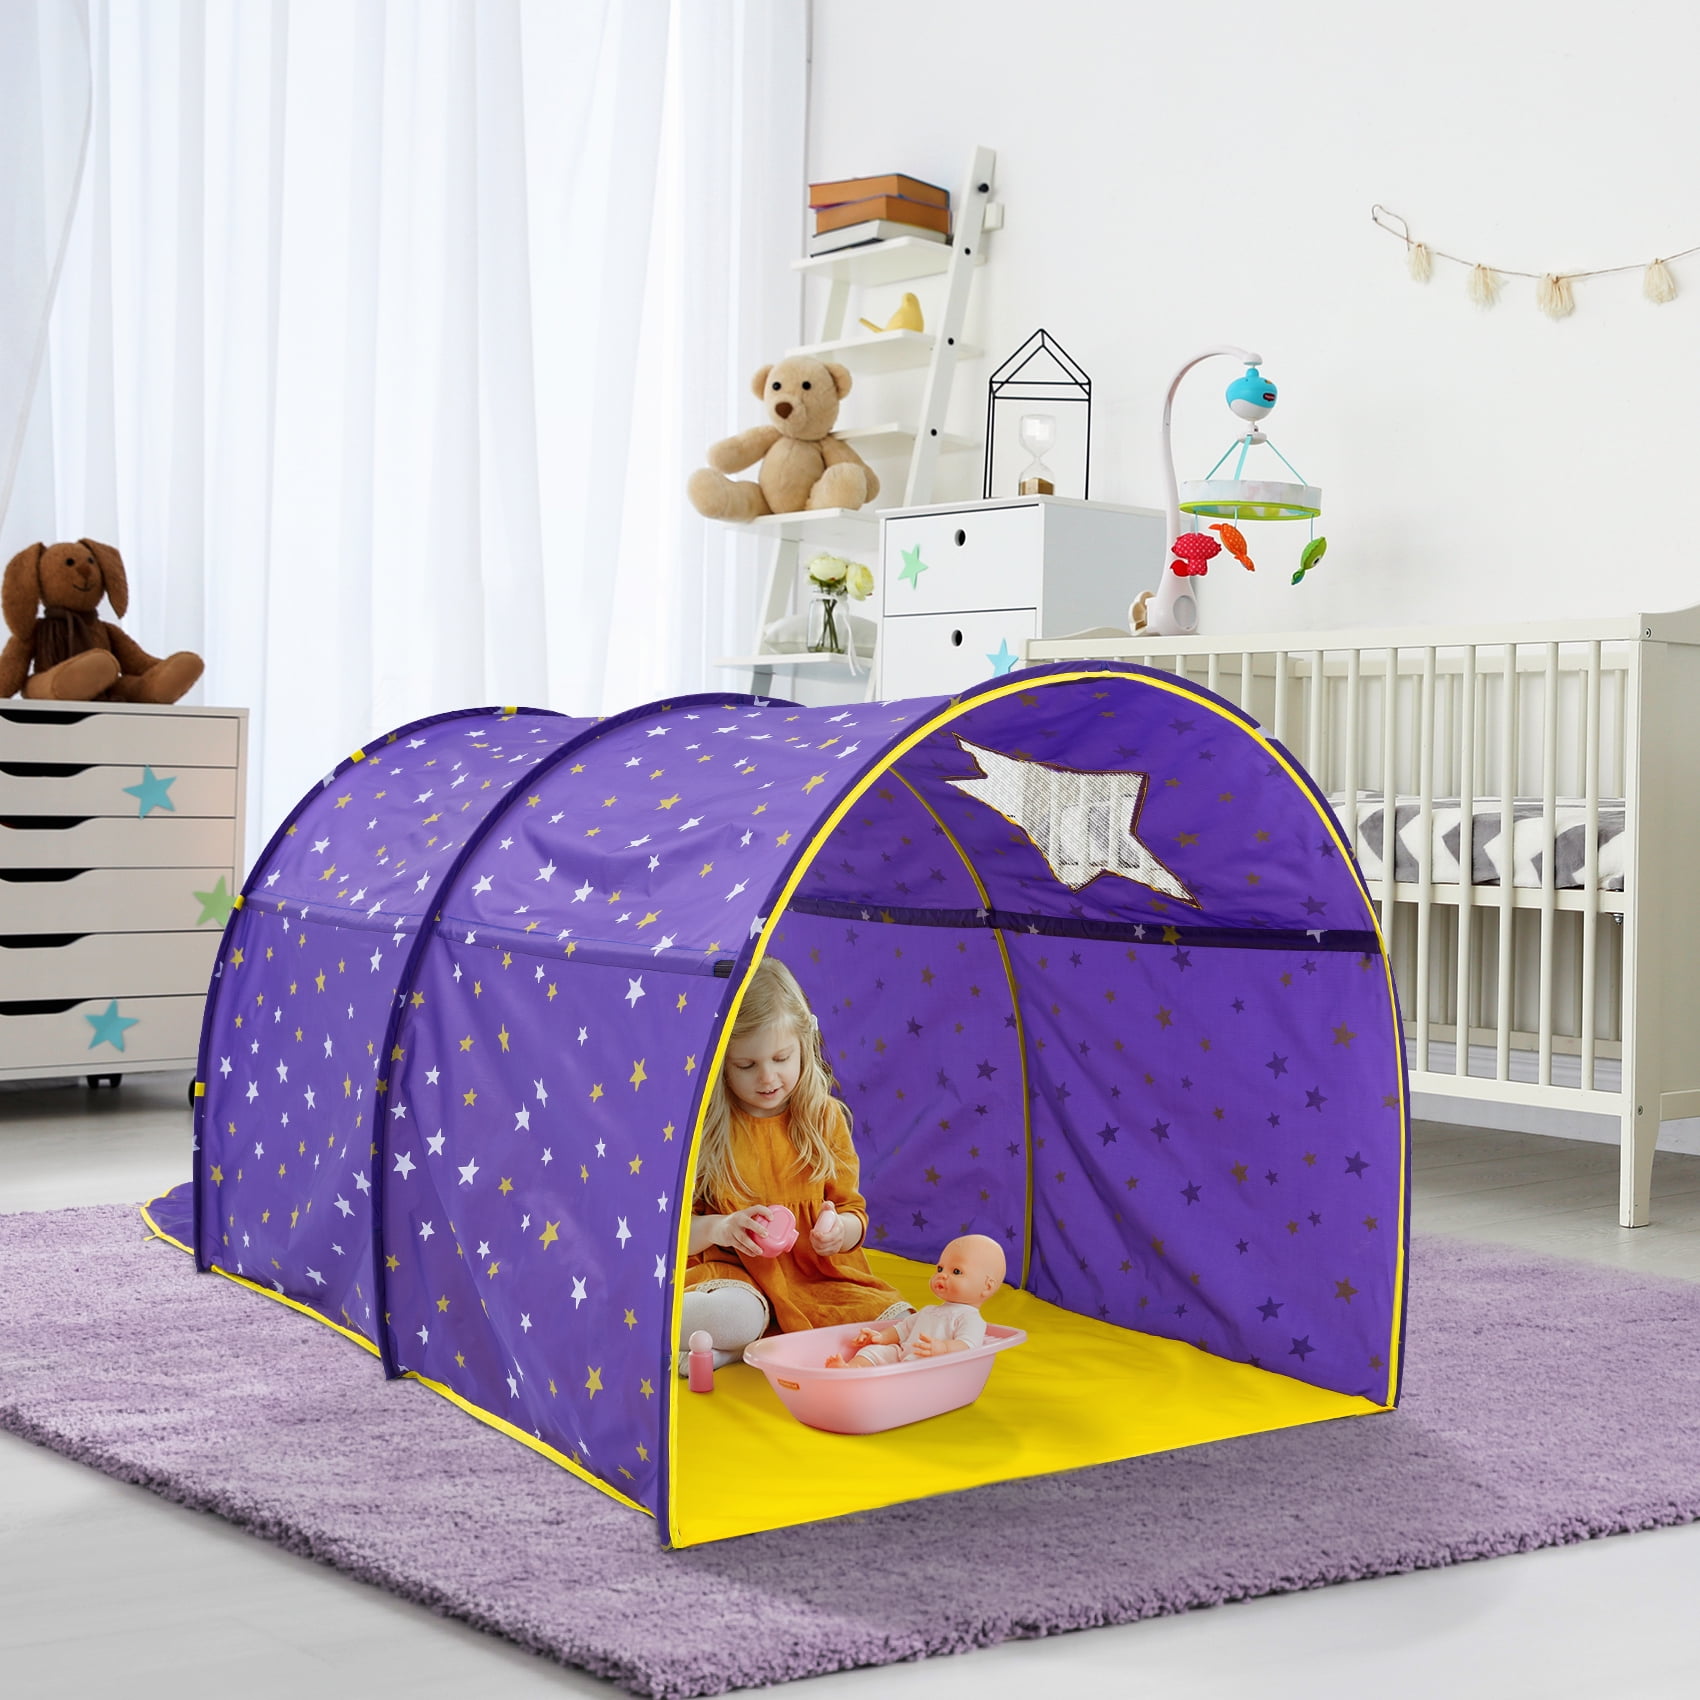 NEW Kids Dream Bed Tents with LED Light Children Fantasy Night Sleeping Fordable 